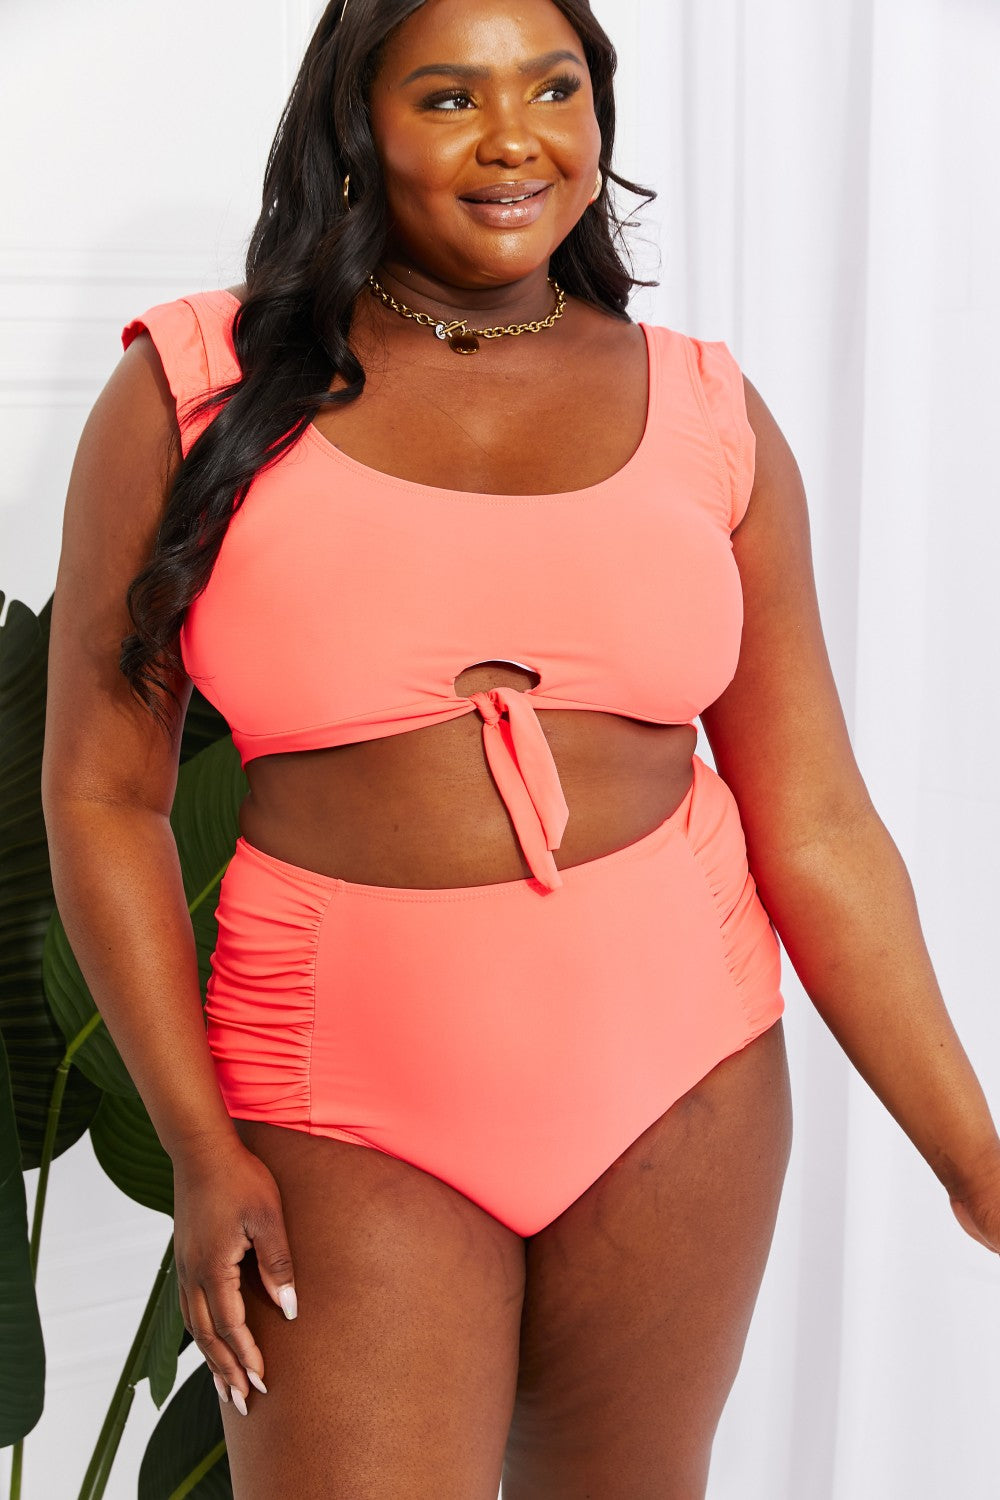 Marina West Swim Sanibel Crop Swim Top and Ruched Bottoms Set in Coral - Cheeky Chic Boutique